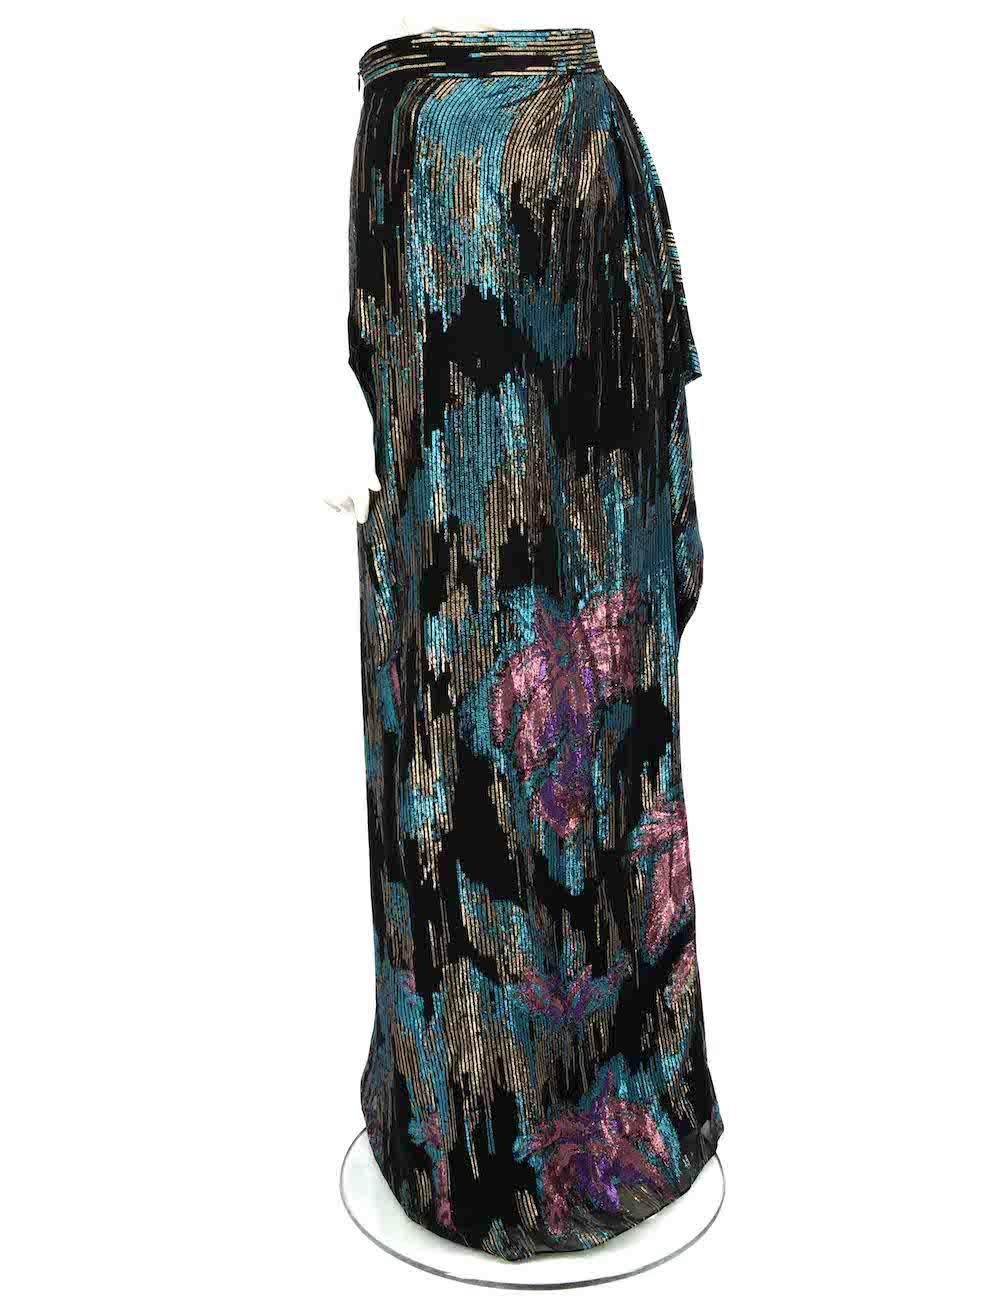 CONDITION is Very good. Hardly any visible wear to skirt is evident on this used Peter Pilotto designer resale item.
 
 
 
 Details
 
 
 Multicolour - black and metallic thread
 
 Silk
 
 Skirt
 
 Metallic woven pattern
 
 Maxi
 
 Side ruffle